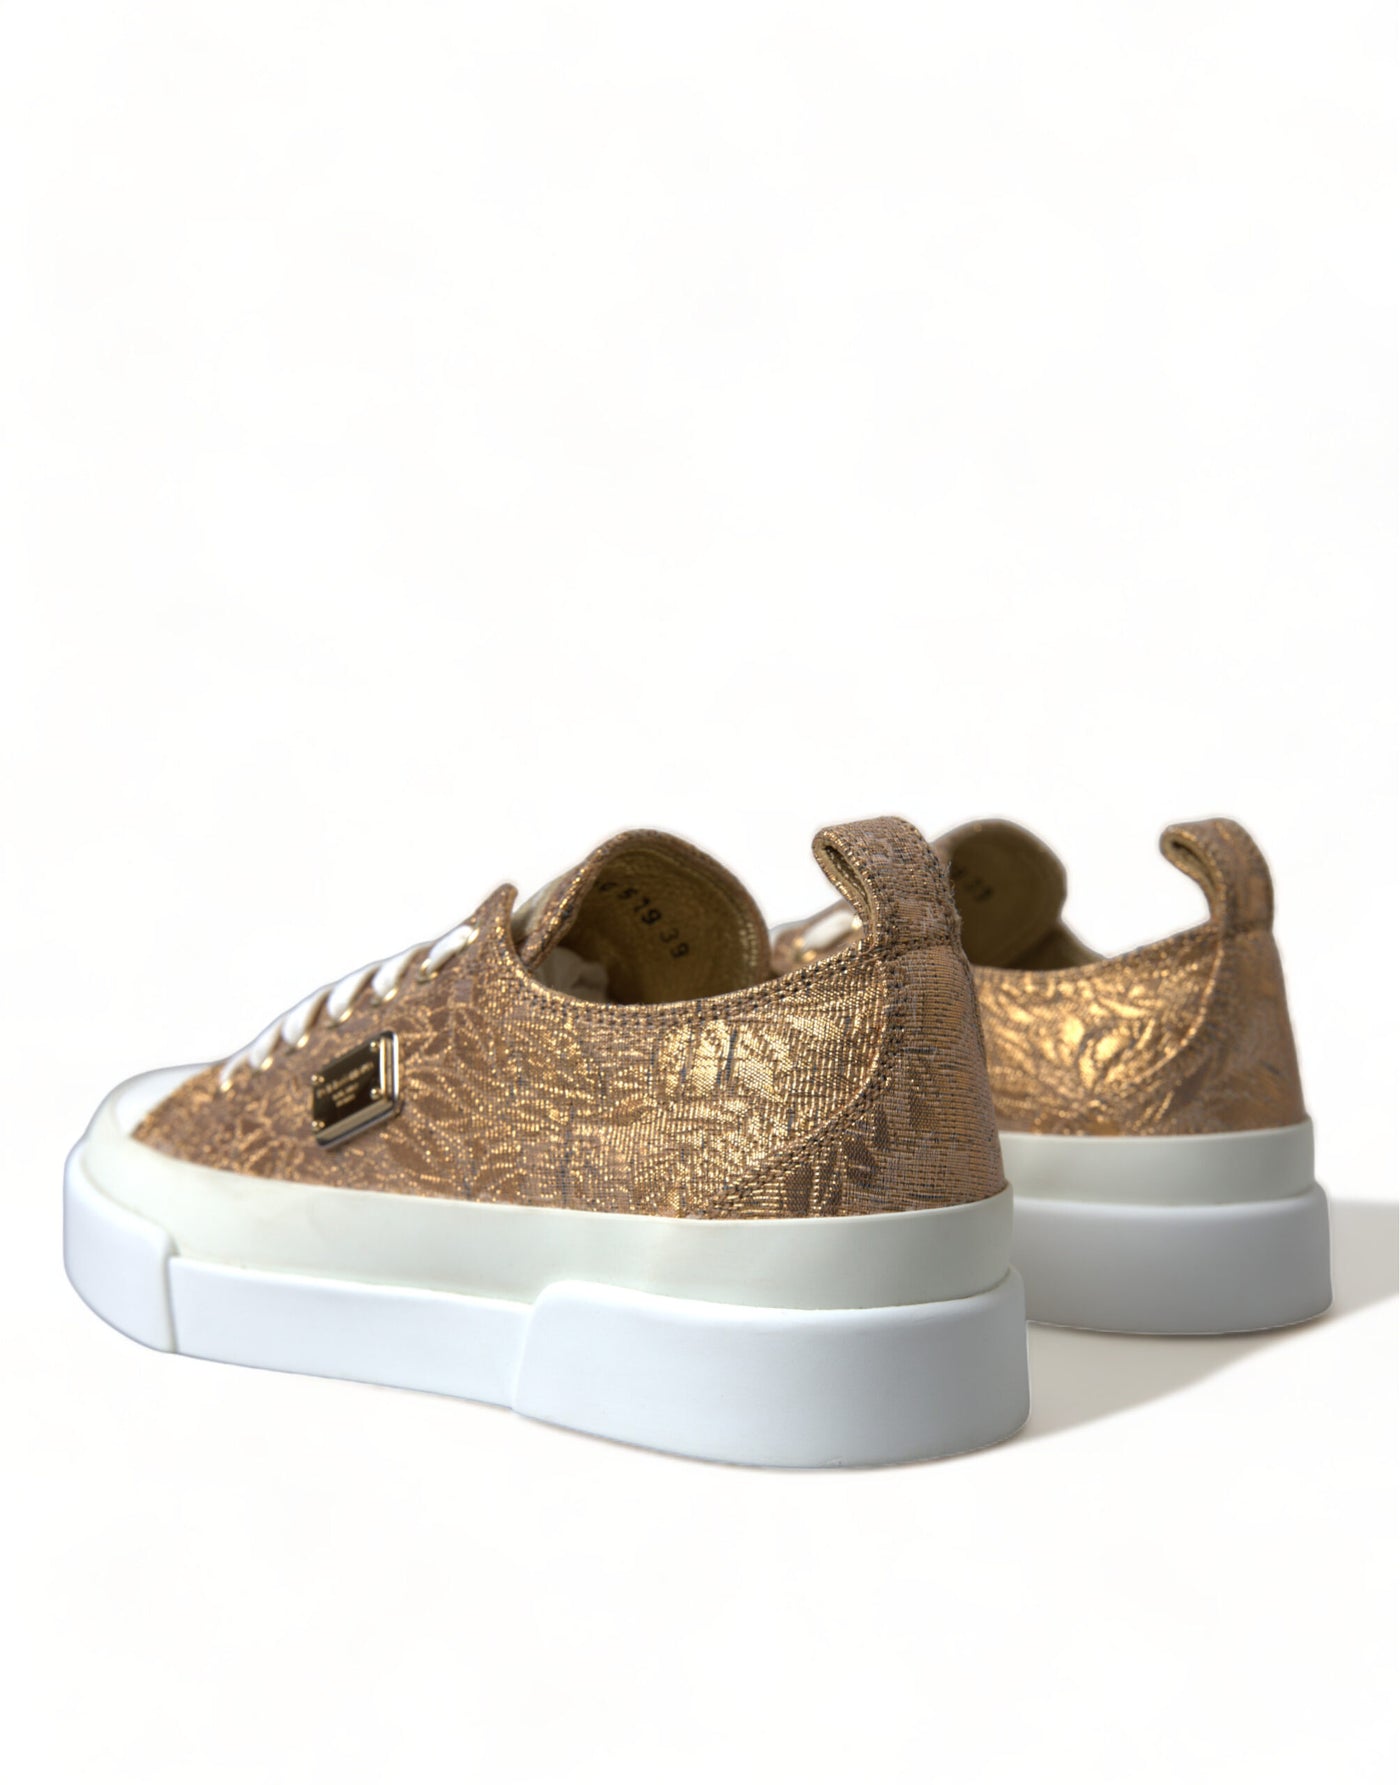 Dolce & Gabbana Gold White Brocade Low Top Sneakers Women Shoes